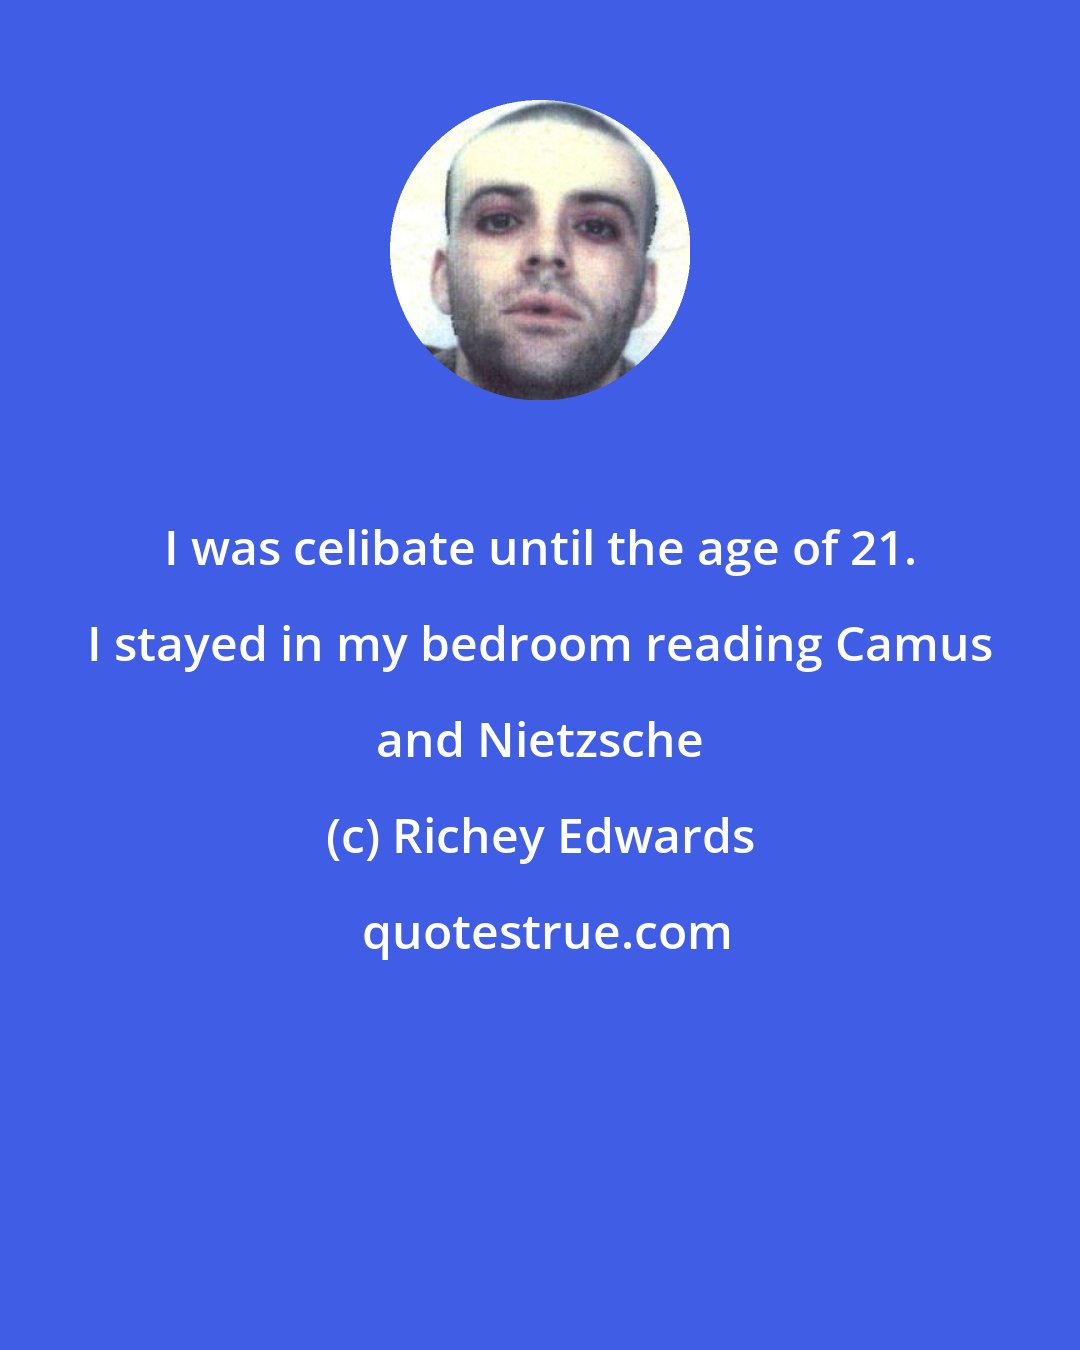 Richey Edwards: I was celibate until the age of 21. I stayed in my bedroom reading Camus and Nietzsche